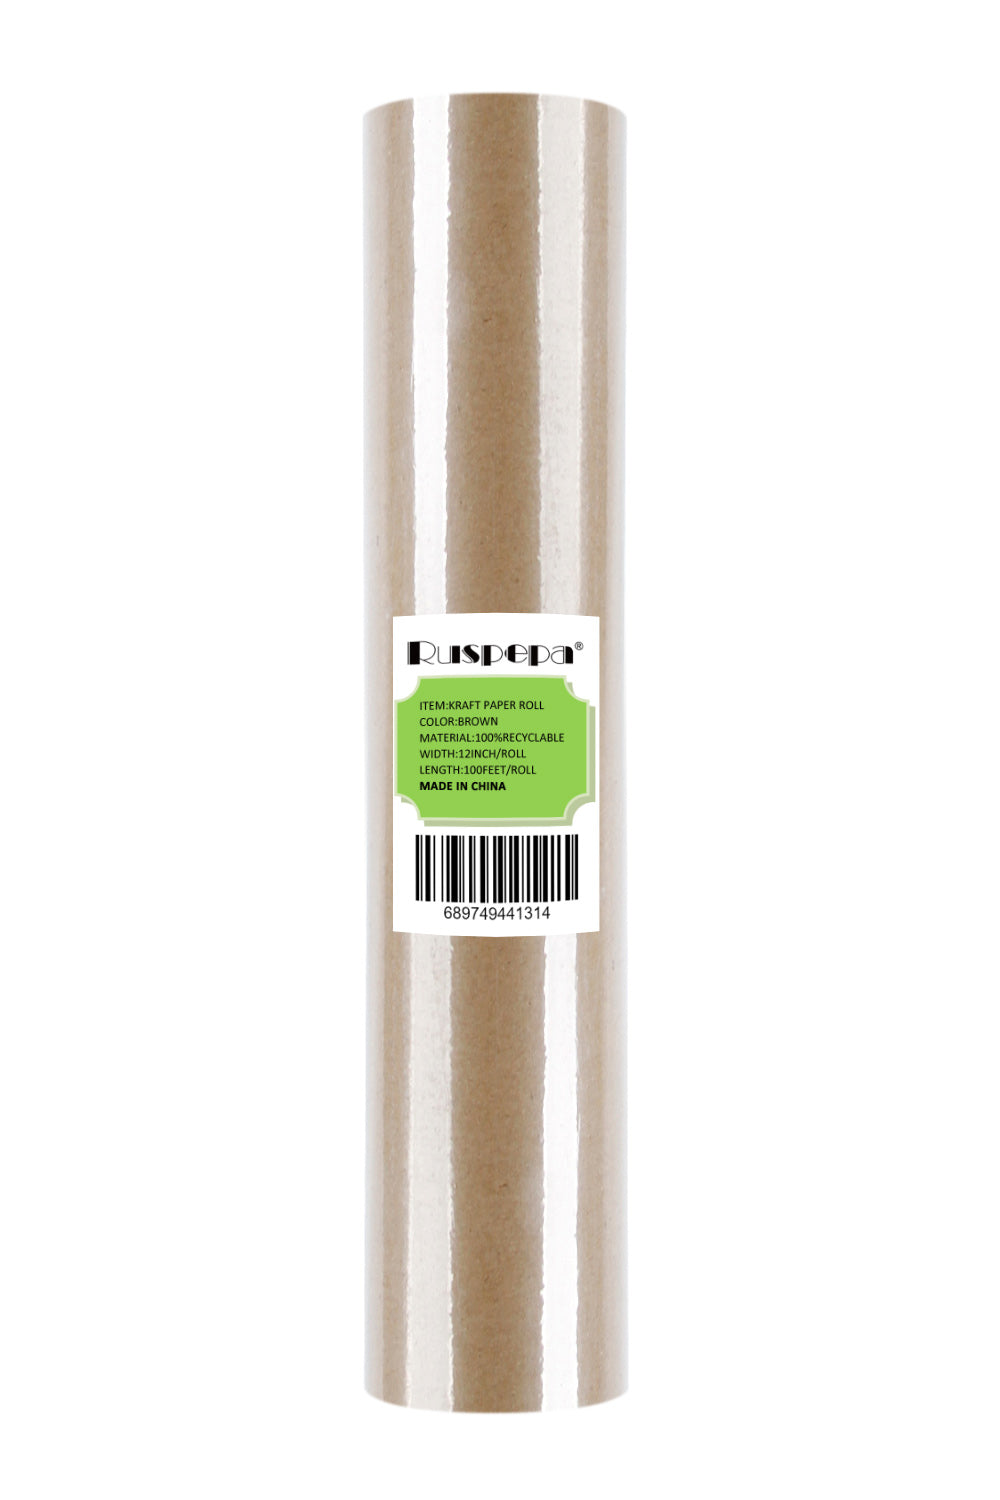  RUSPEPA Black Kraft Paper Roll - 24 inches x 100 feet -  Recyclable Paper Perfect for for Crafts, Art, Wrapping, Packing, Postal,  Shipping, Dunnage & Parcel : Health & Household